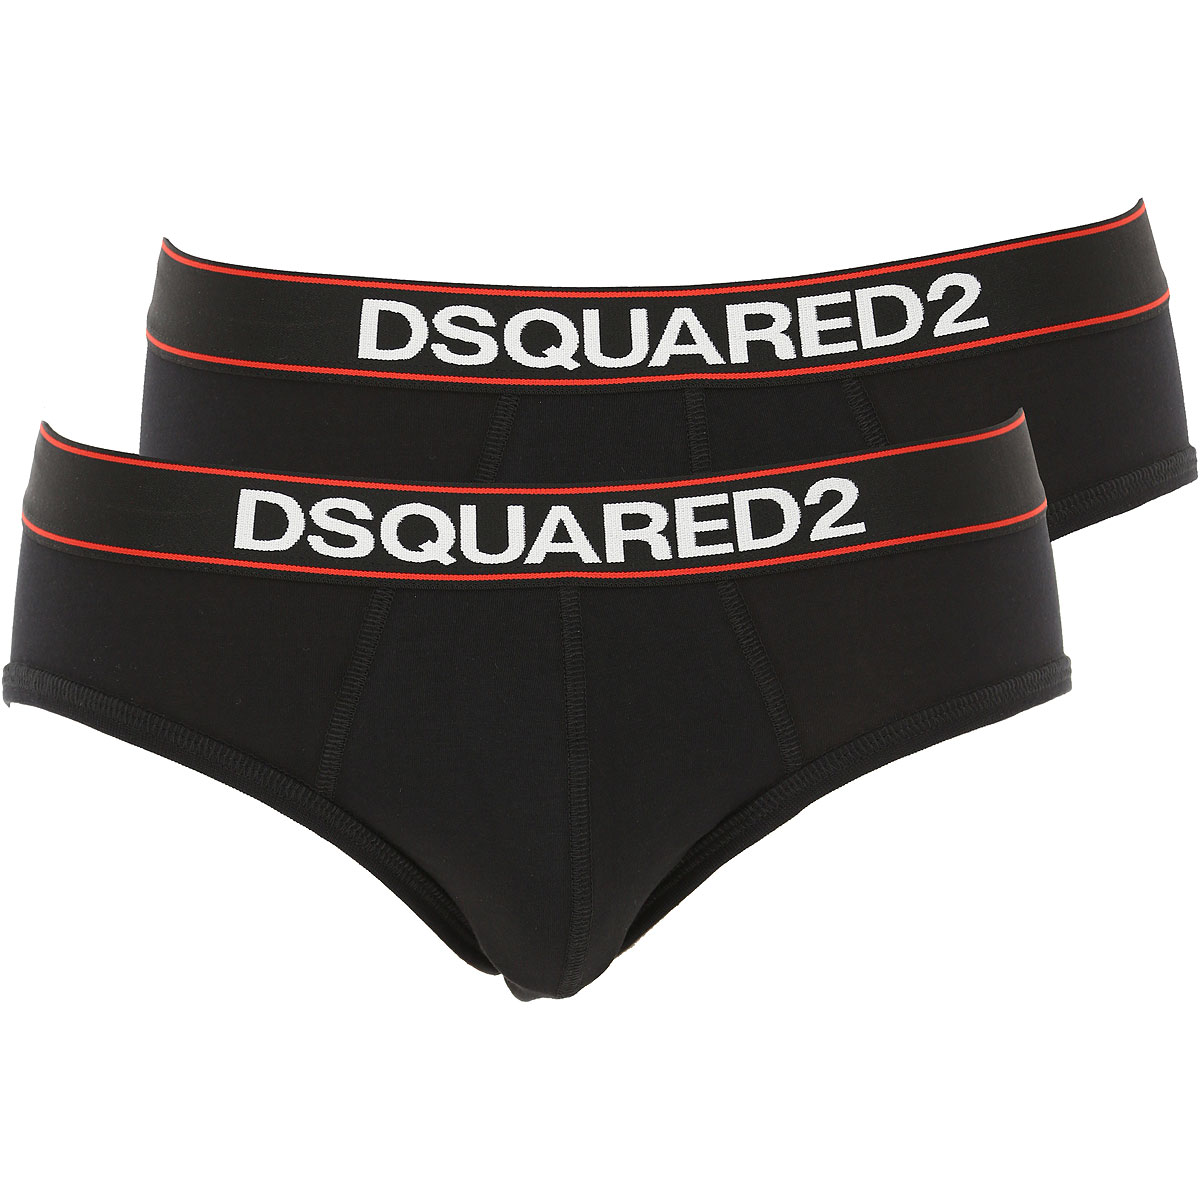 Mens Underwear Dsquared2, Style code: d9x612450-001-